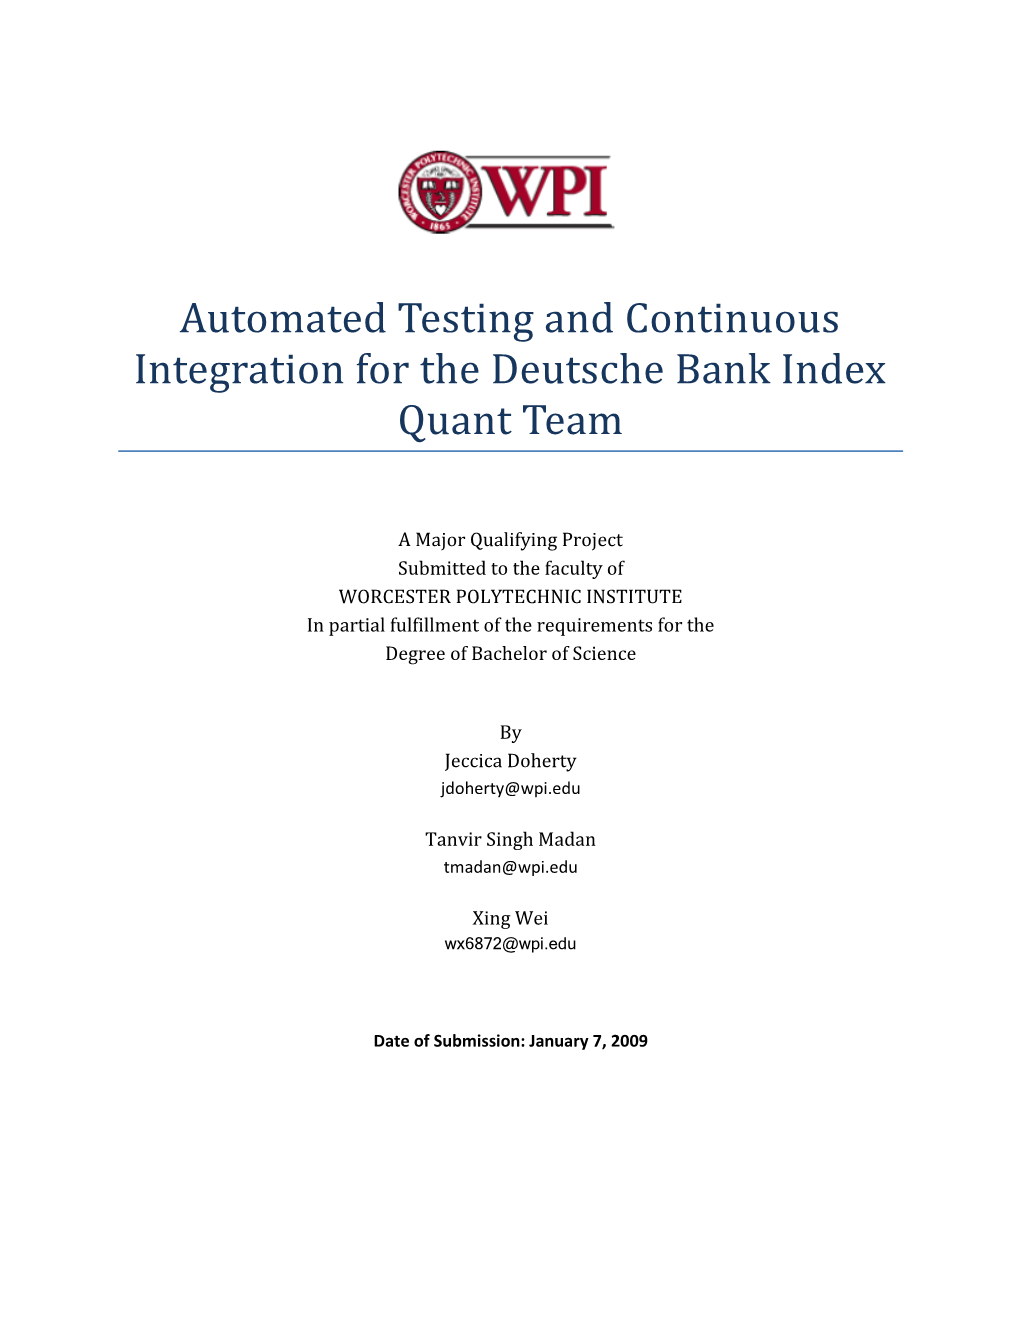 Automated Testing and Continuous Integration for the Deutsche Bank Index Quant Team